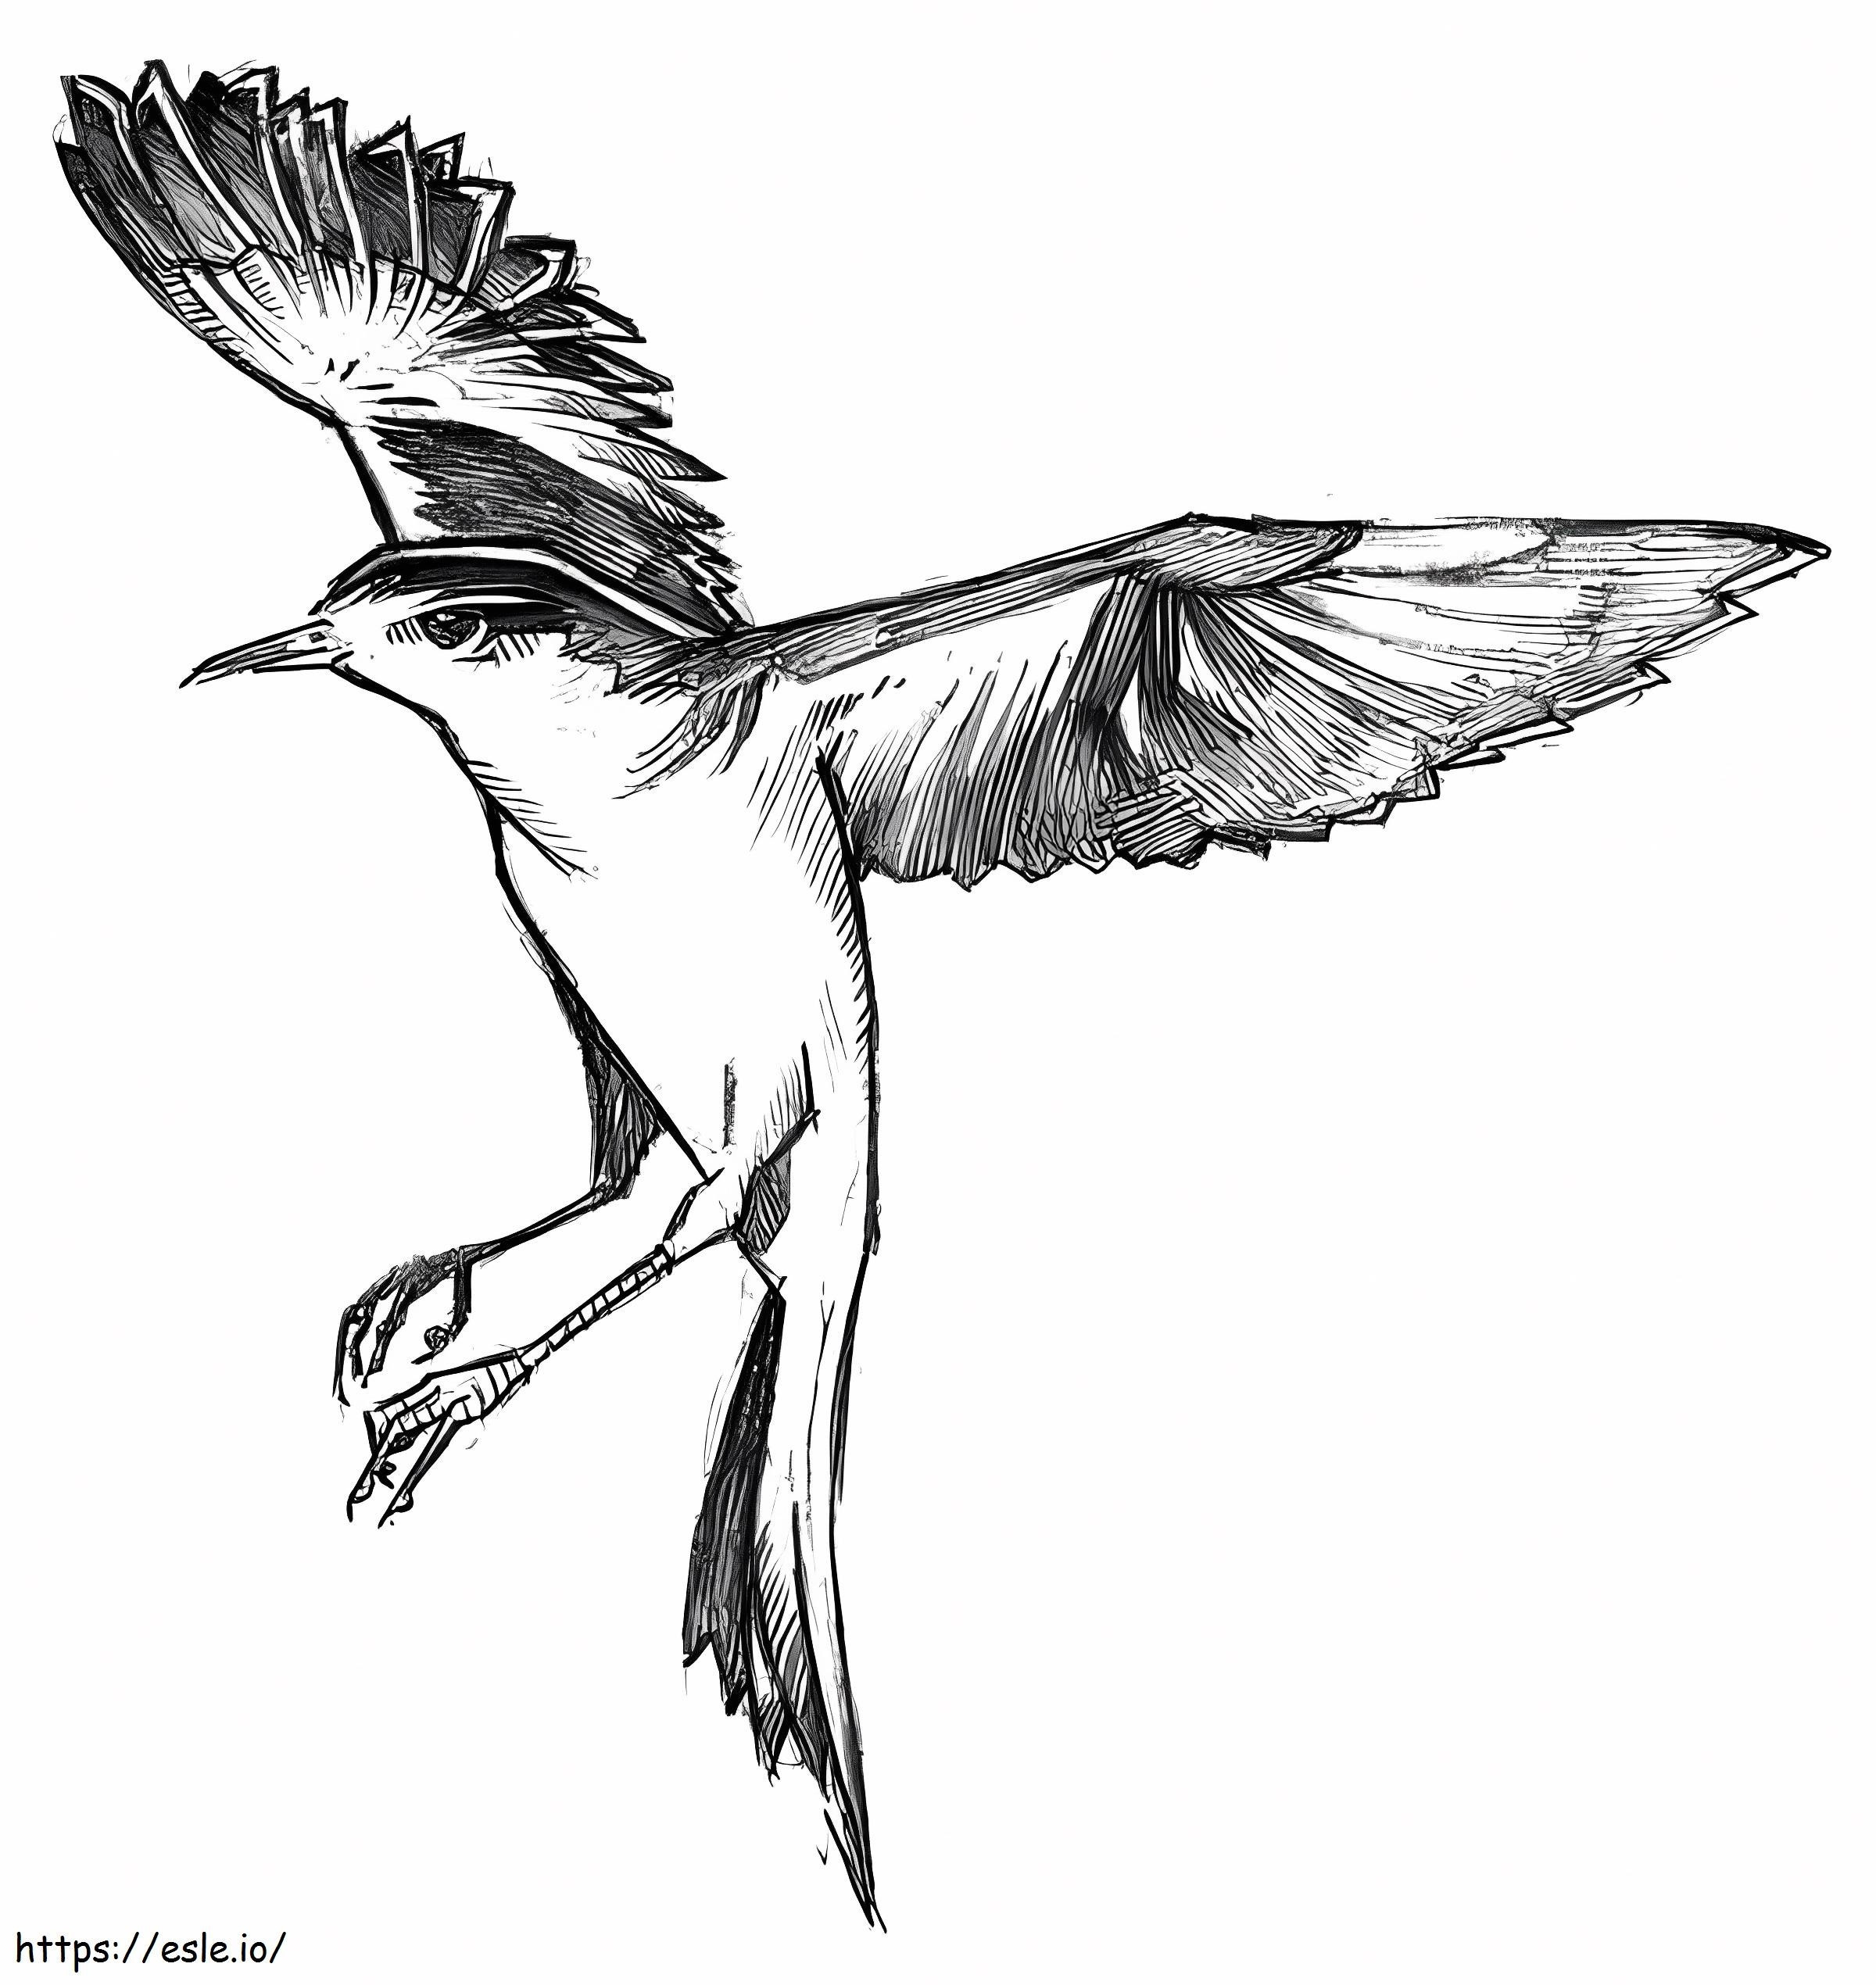 Nightingale Floating In The Air coloring page